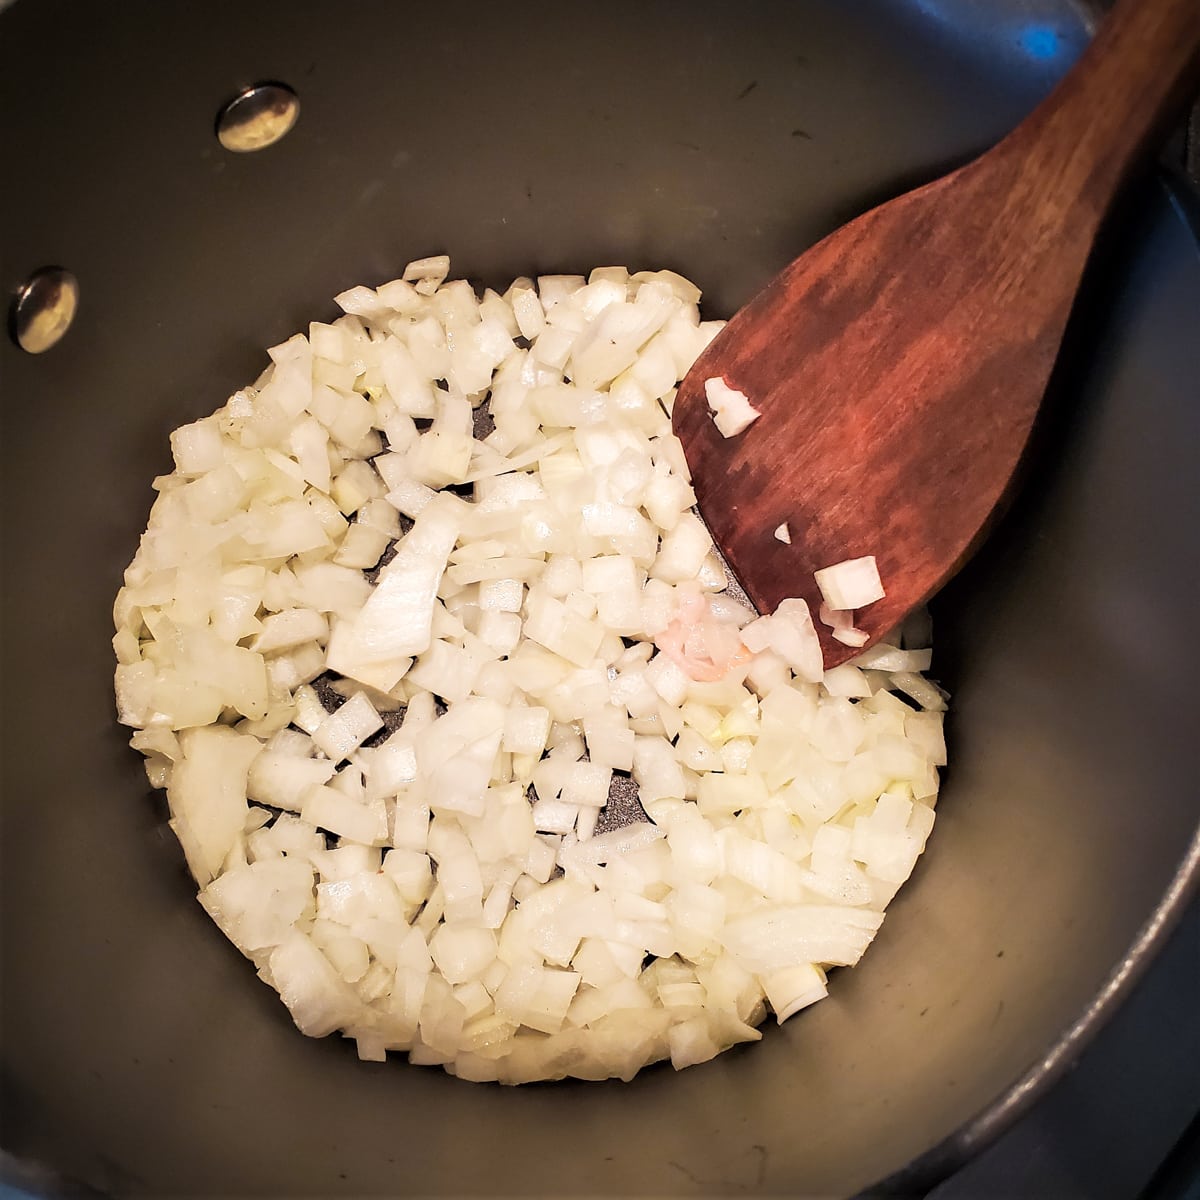 Diced onion cooking in a pot.